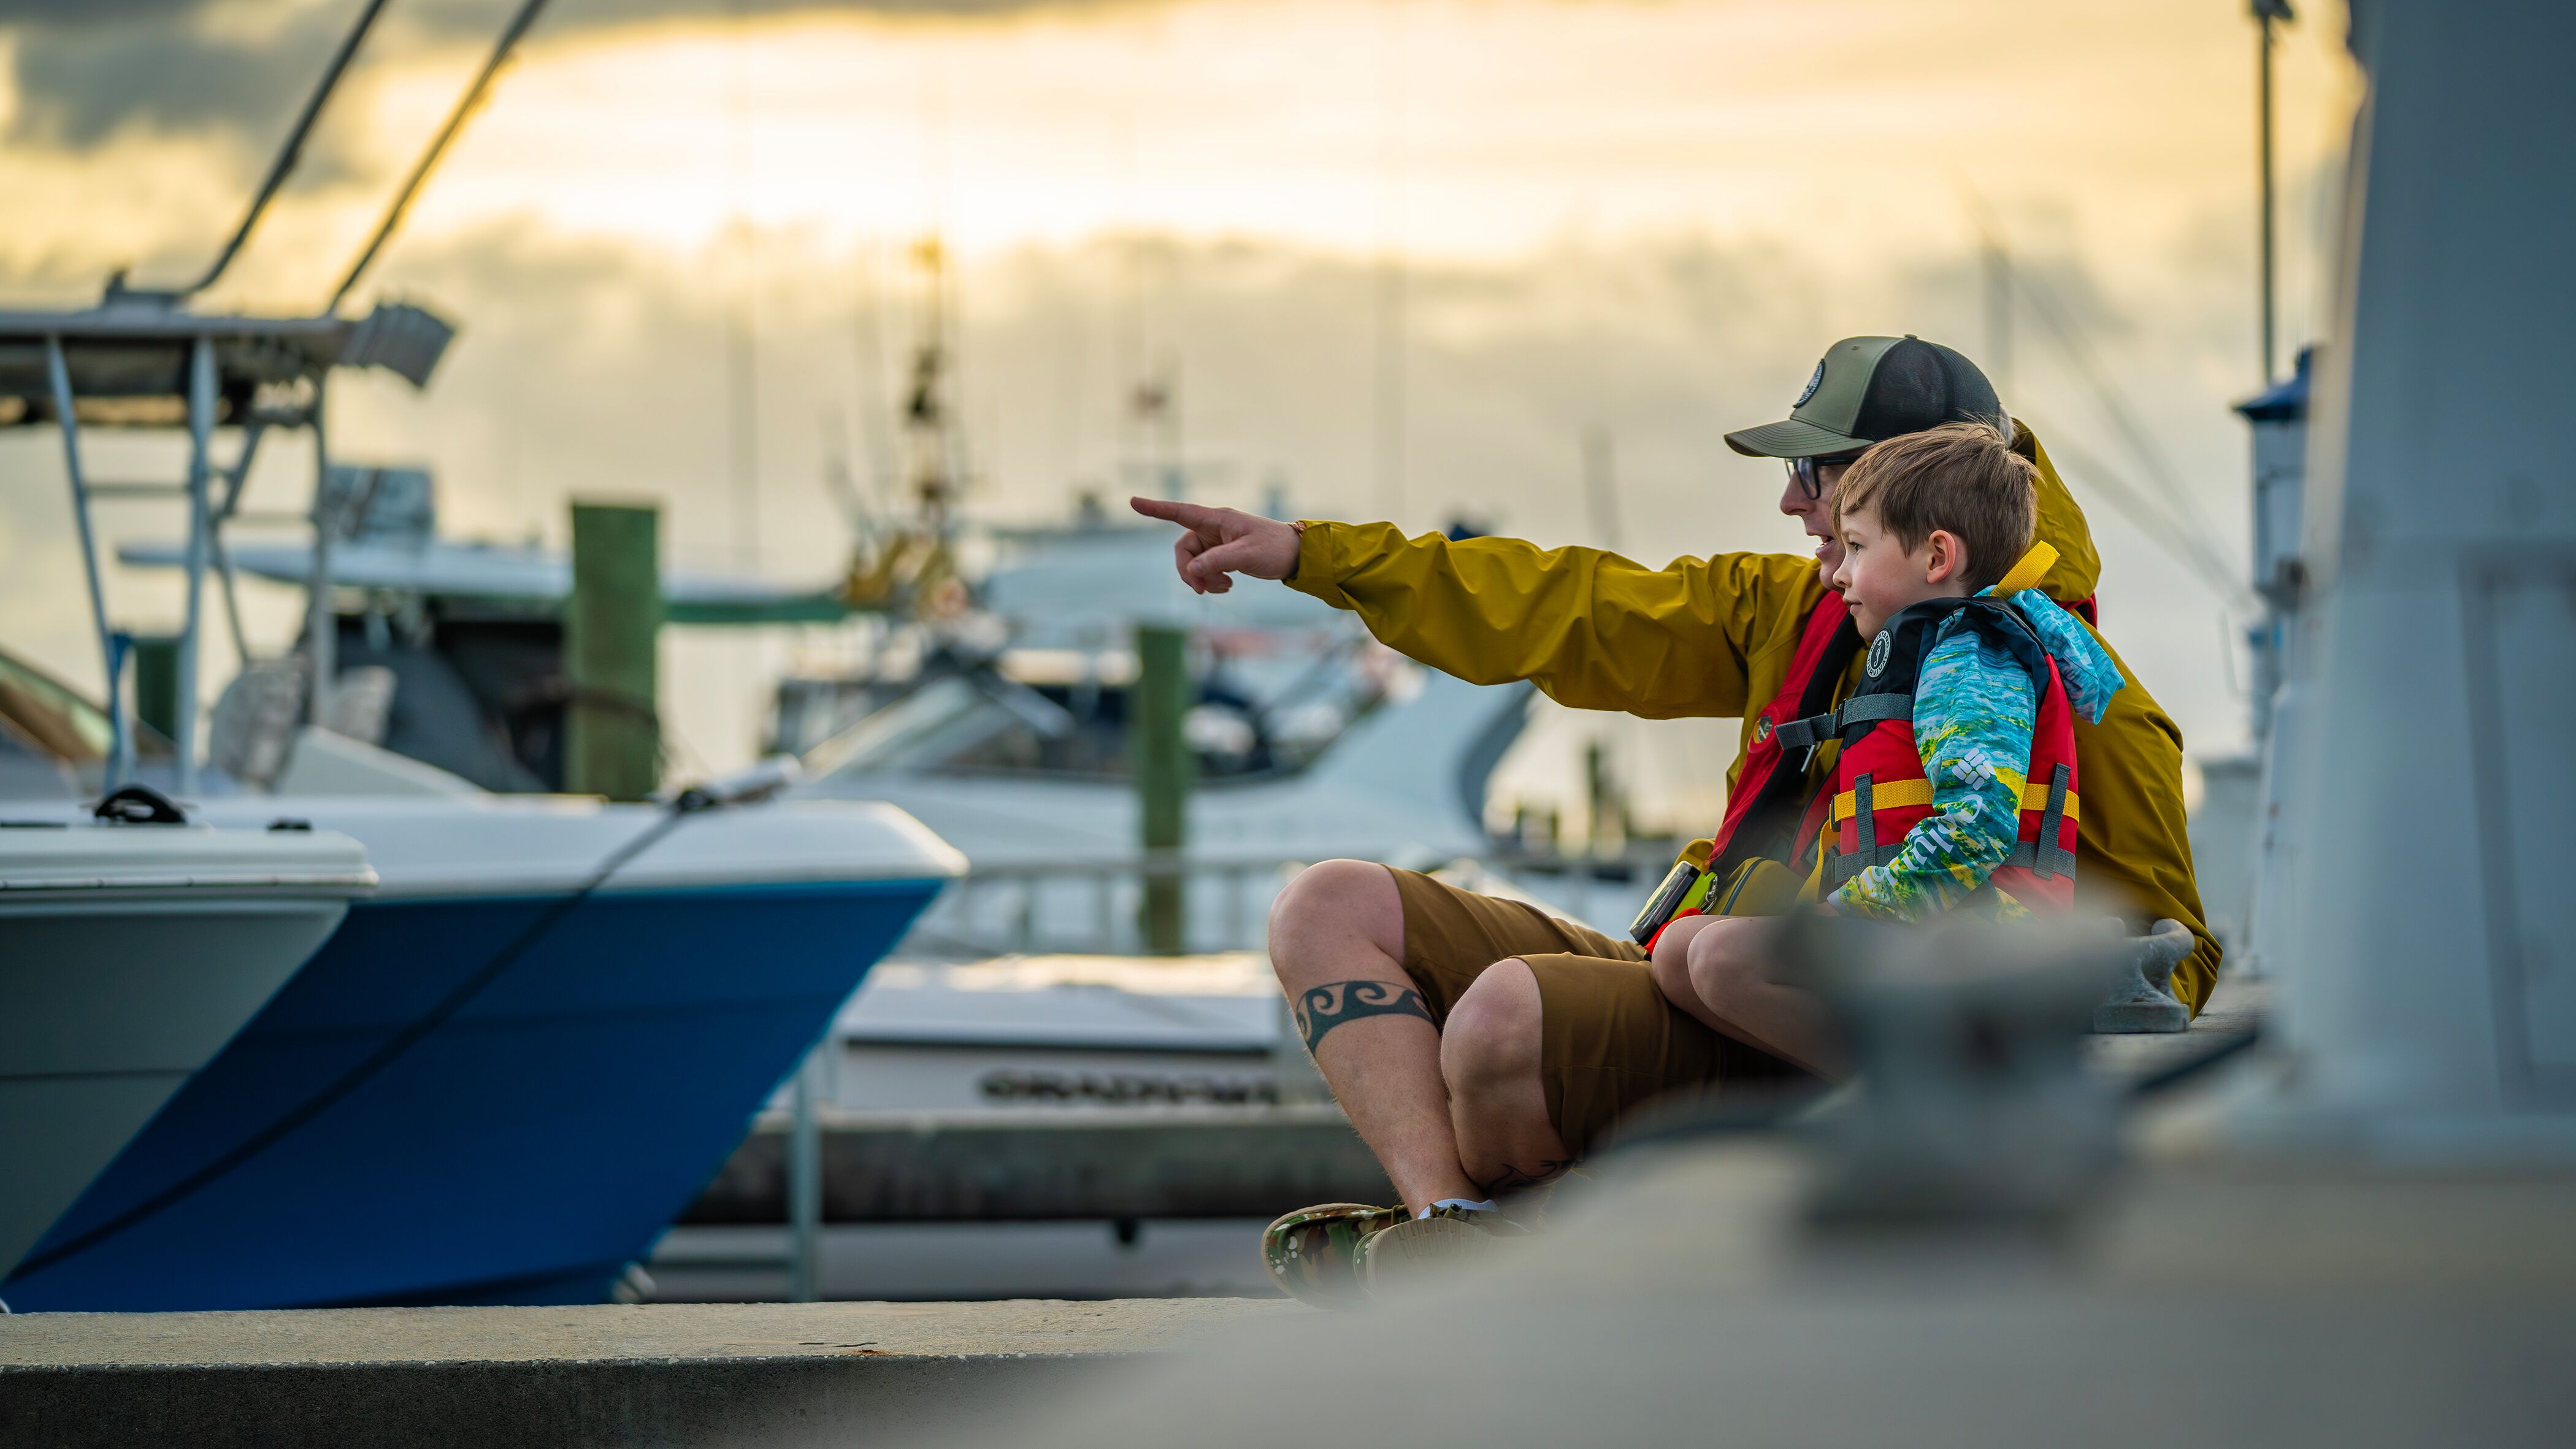 A man and a boy wait on a dock pointing at something in the distance, using boat ramps concept. 